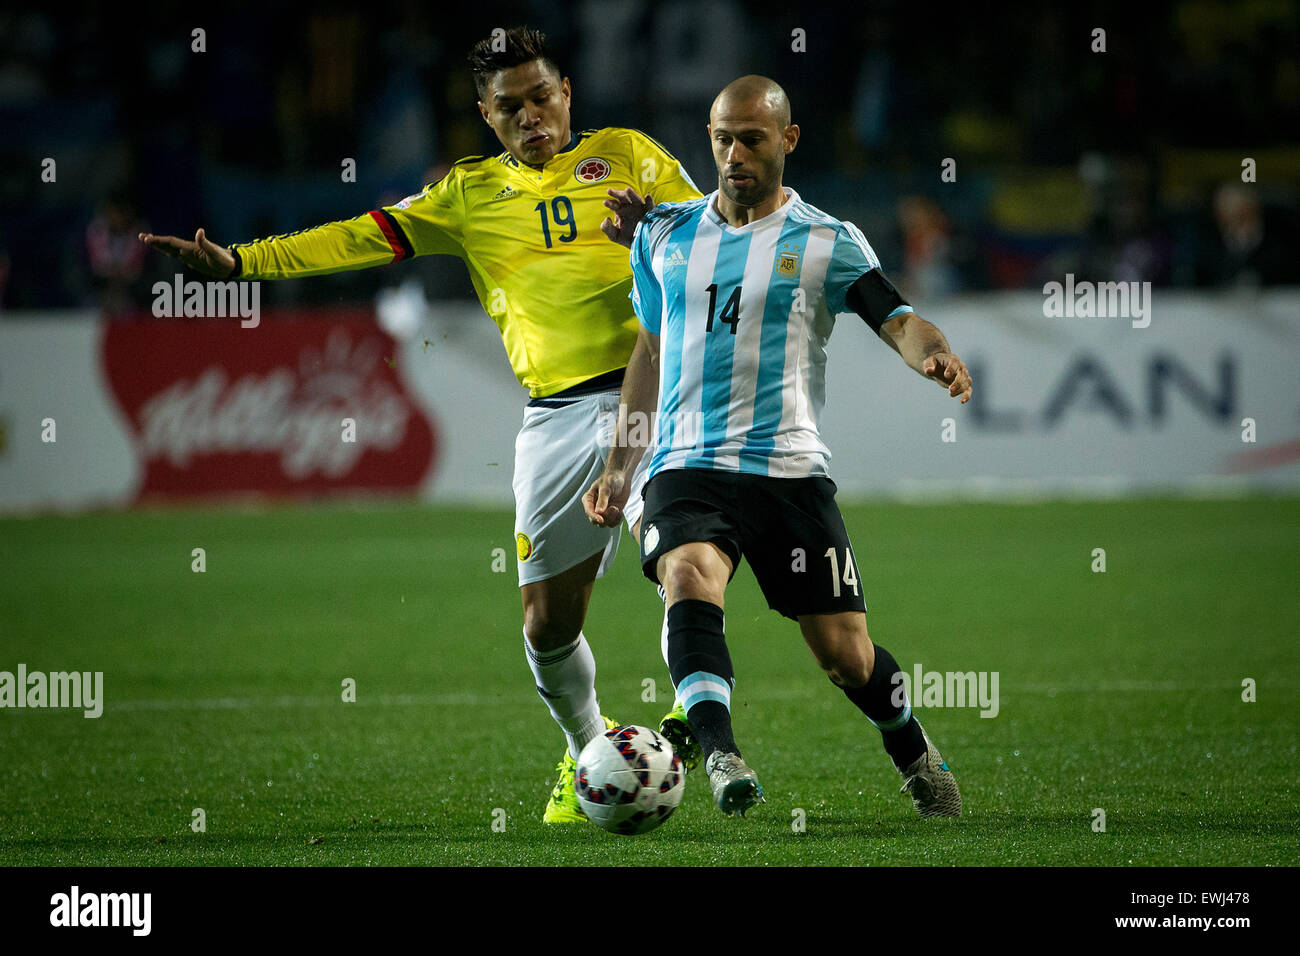 Vina Del Mar, Chile. 26th June, 2015. Argentina's Javier Mascherano (R) vies the ball with Colombia's Teofilo Gutierrez during the quarter-final match between Argentina and Colombia at the Copa America Chile 2015 in the El Sausalito Stadium, in Vina del Mar city, Chile, on June 26, 2015. Credit:  Pedro Mera/Xinhua/Alamy Live News Stock Photo